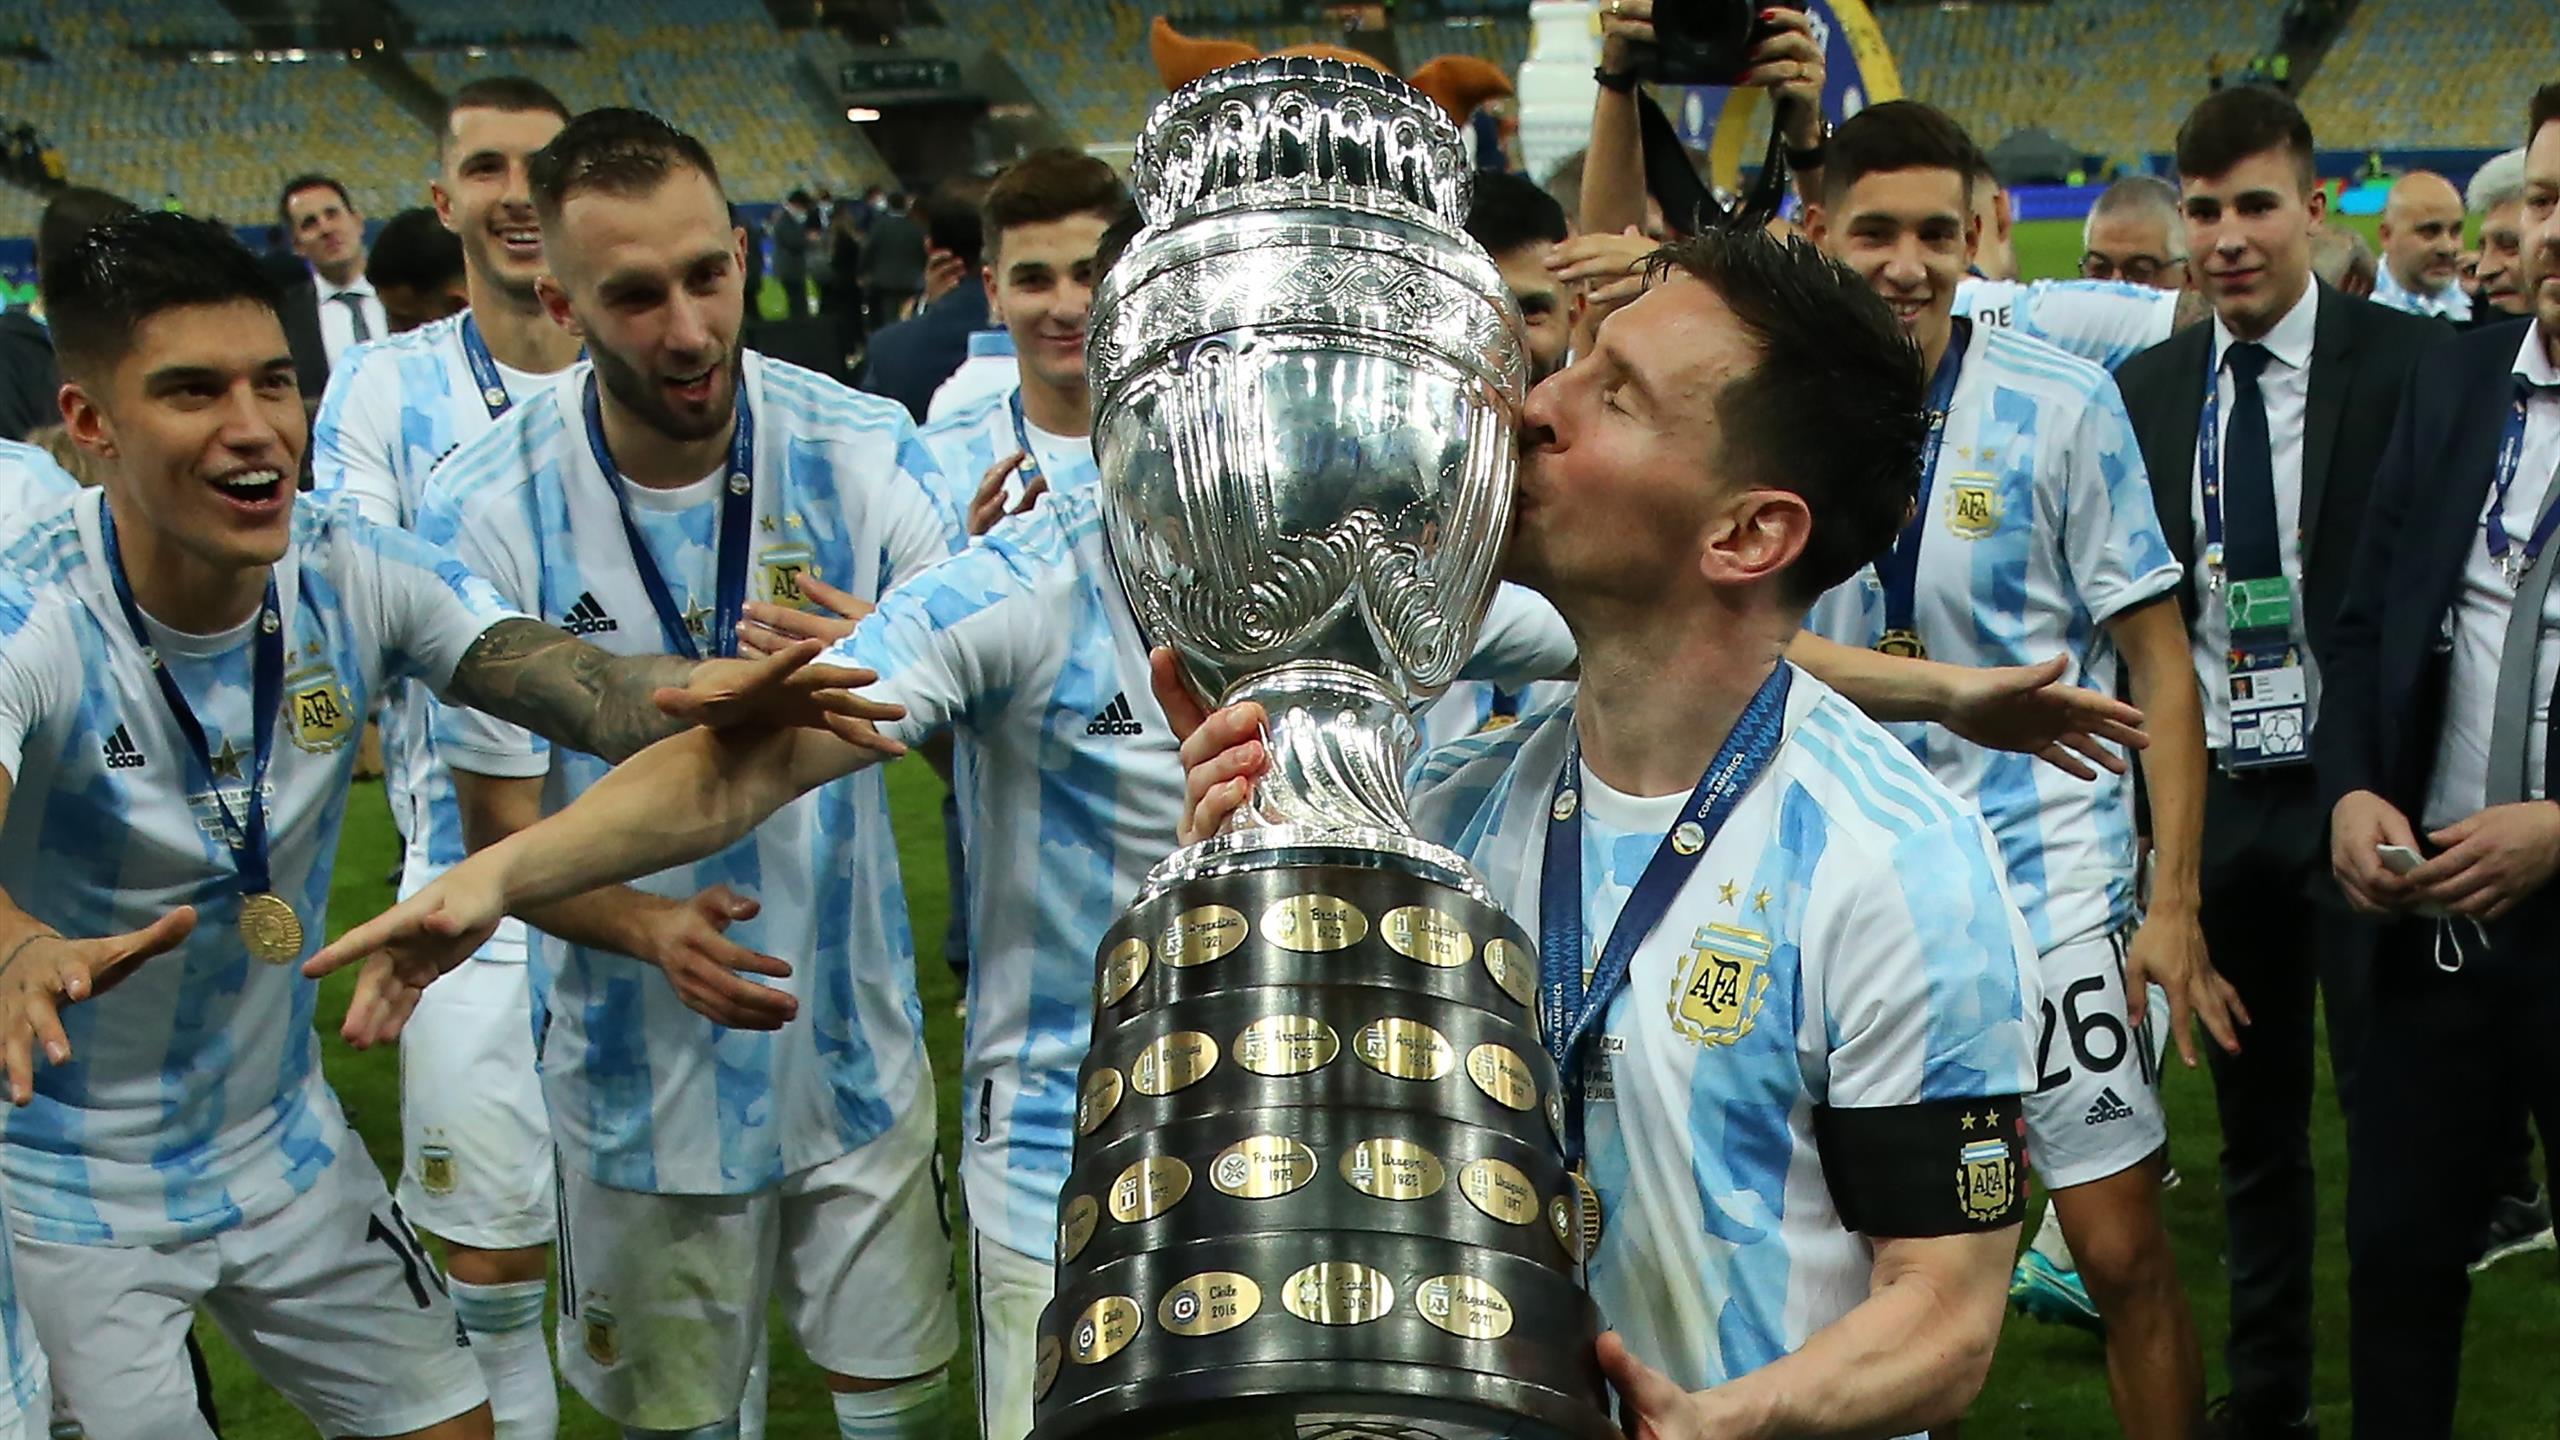 Lionel Messi wins Copa America: Argentina star ecstatic after winning his first major international trophy